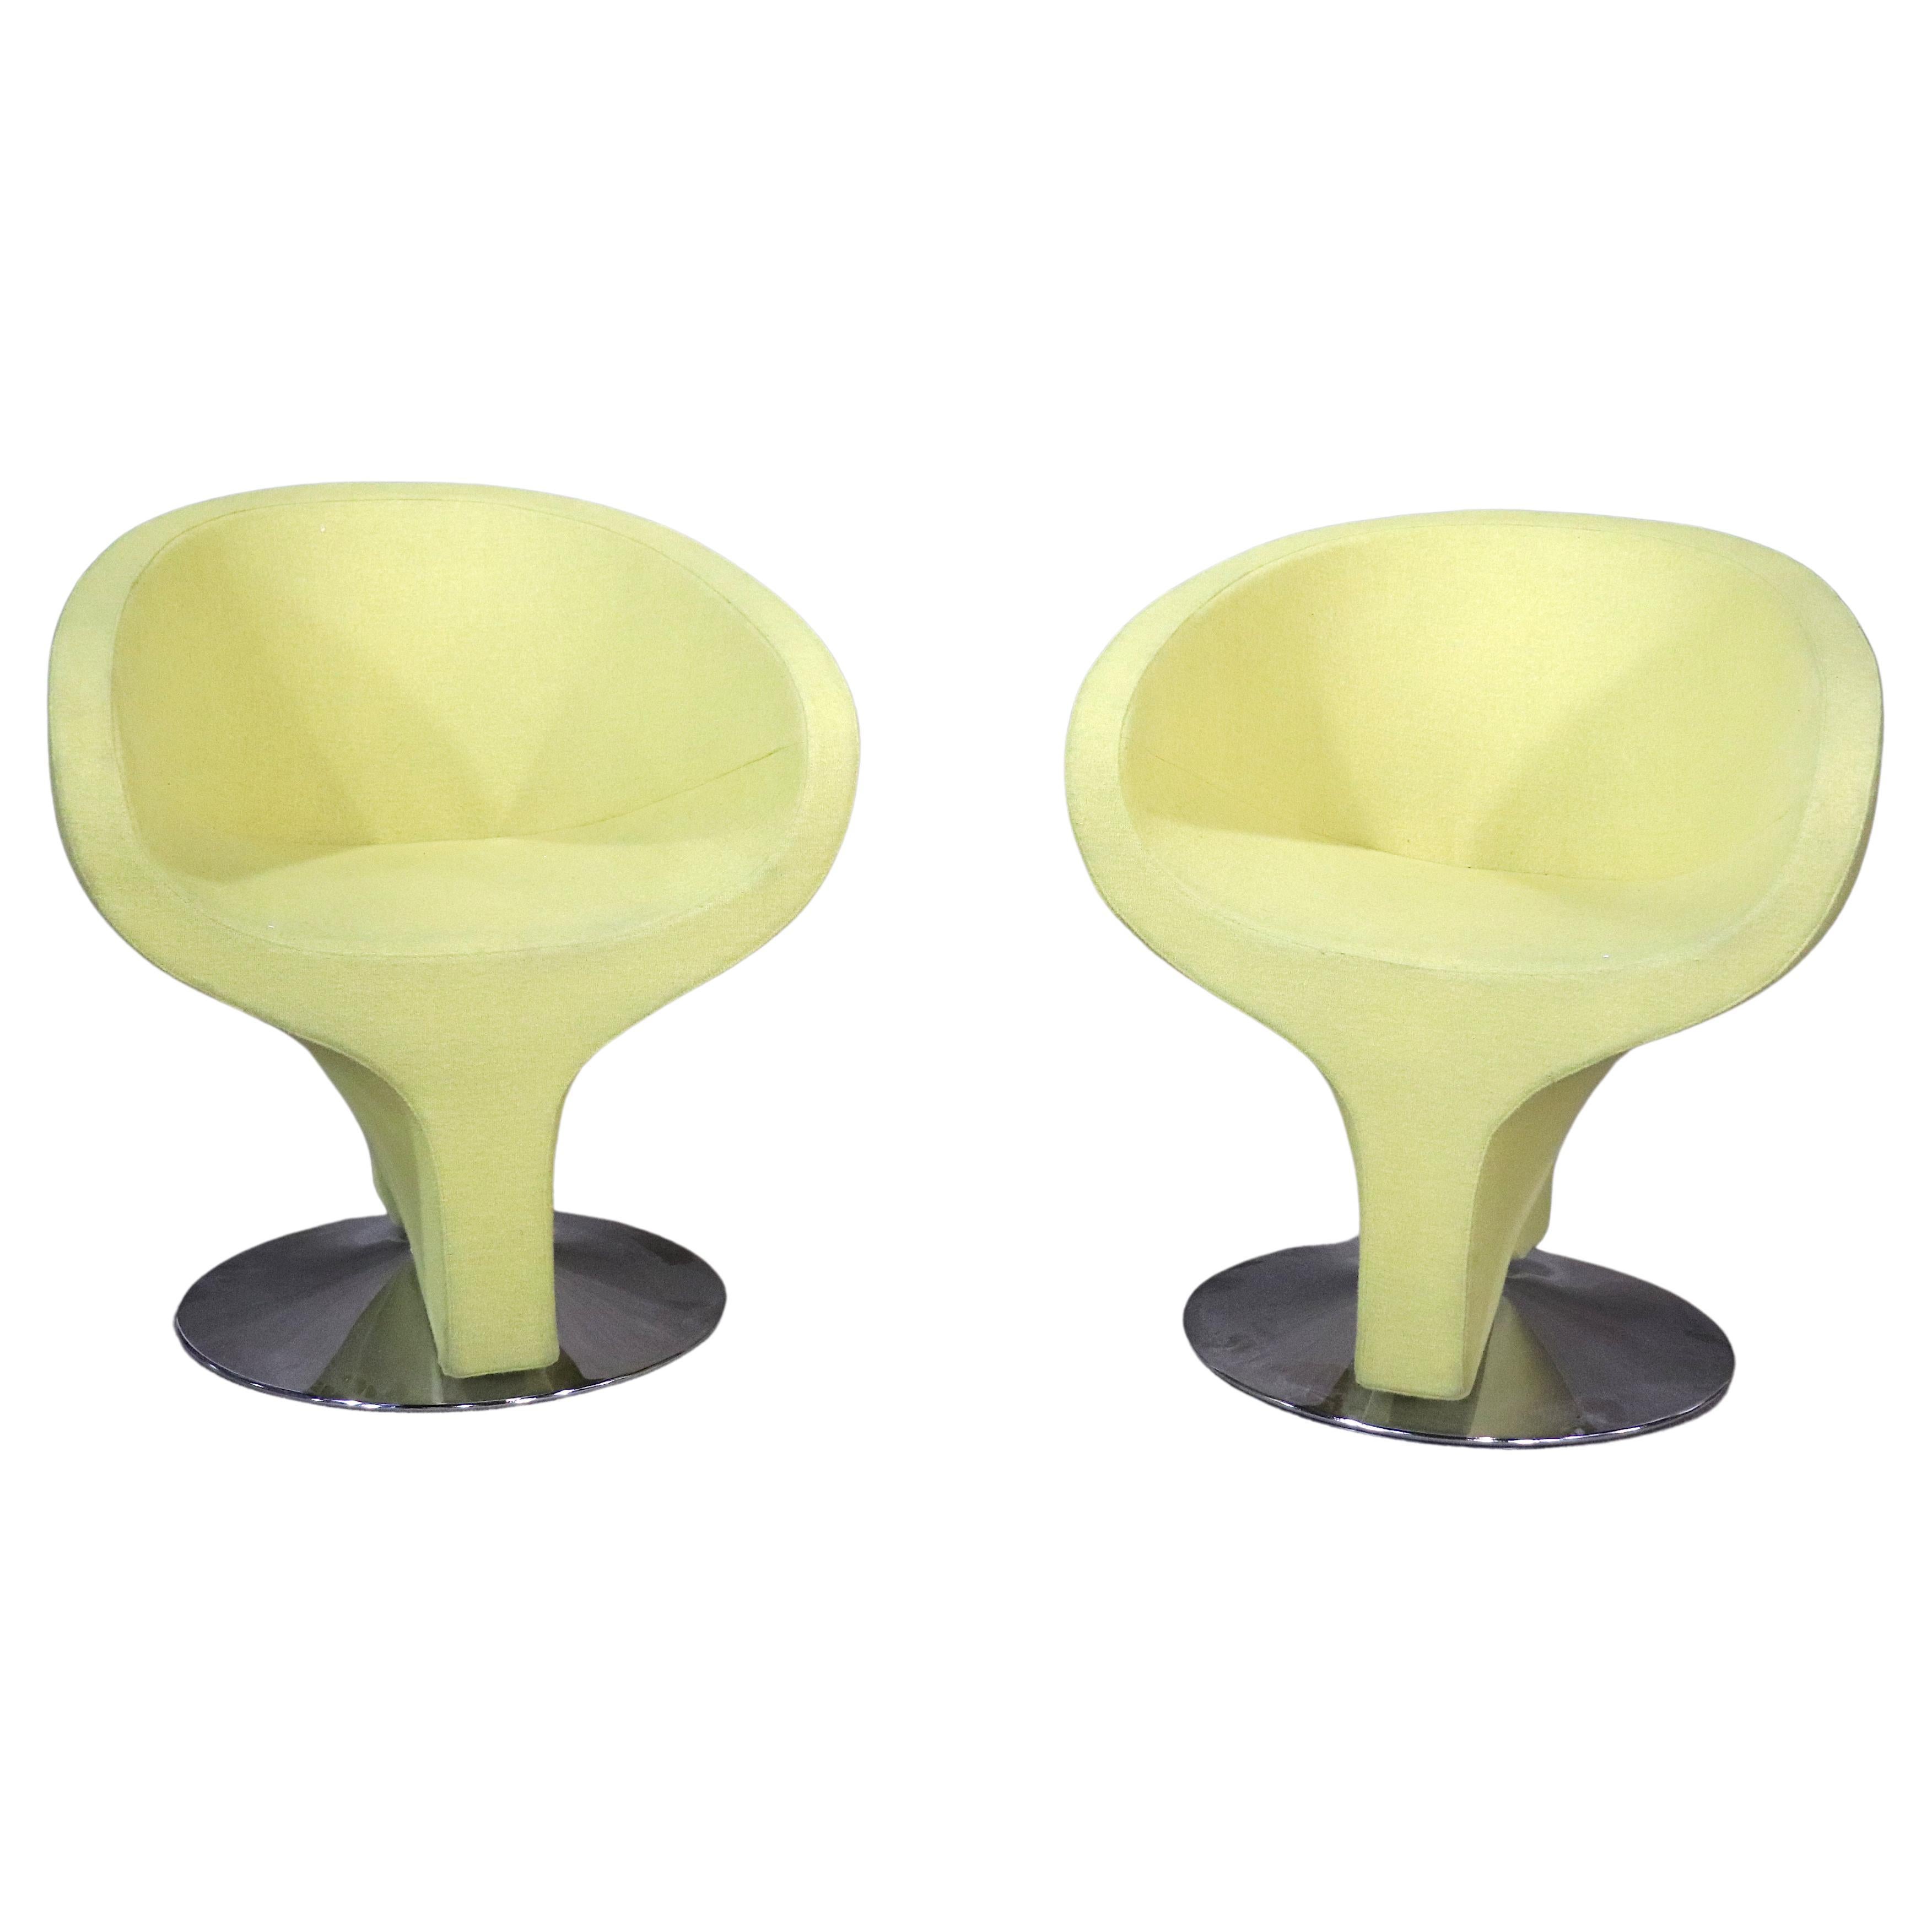 Space Age Style Swivel Chairs For Sale